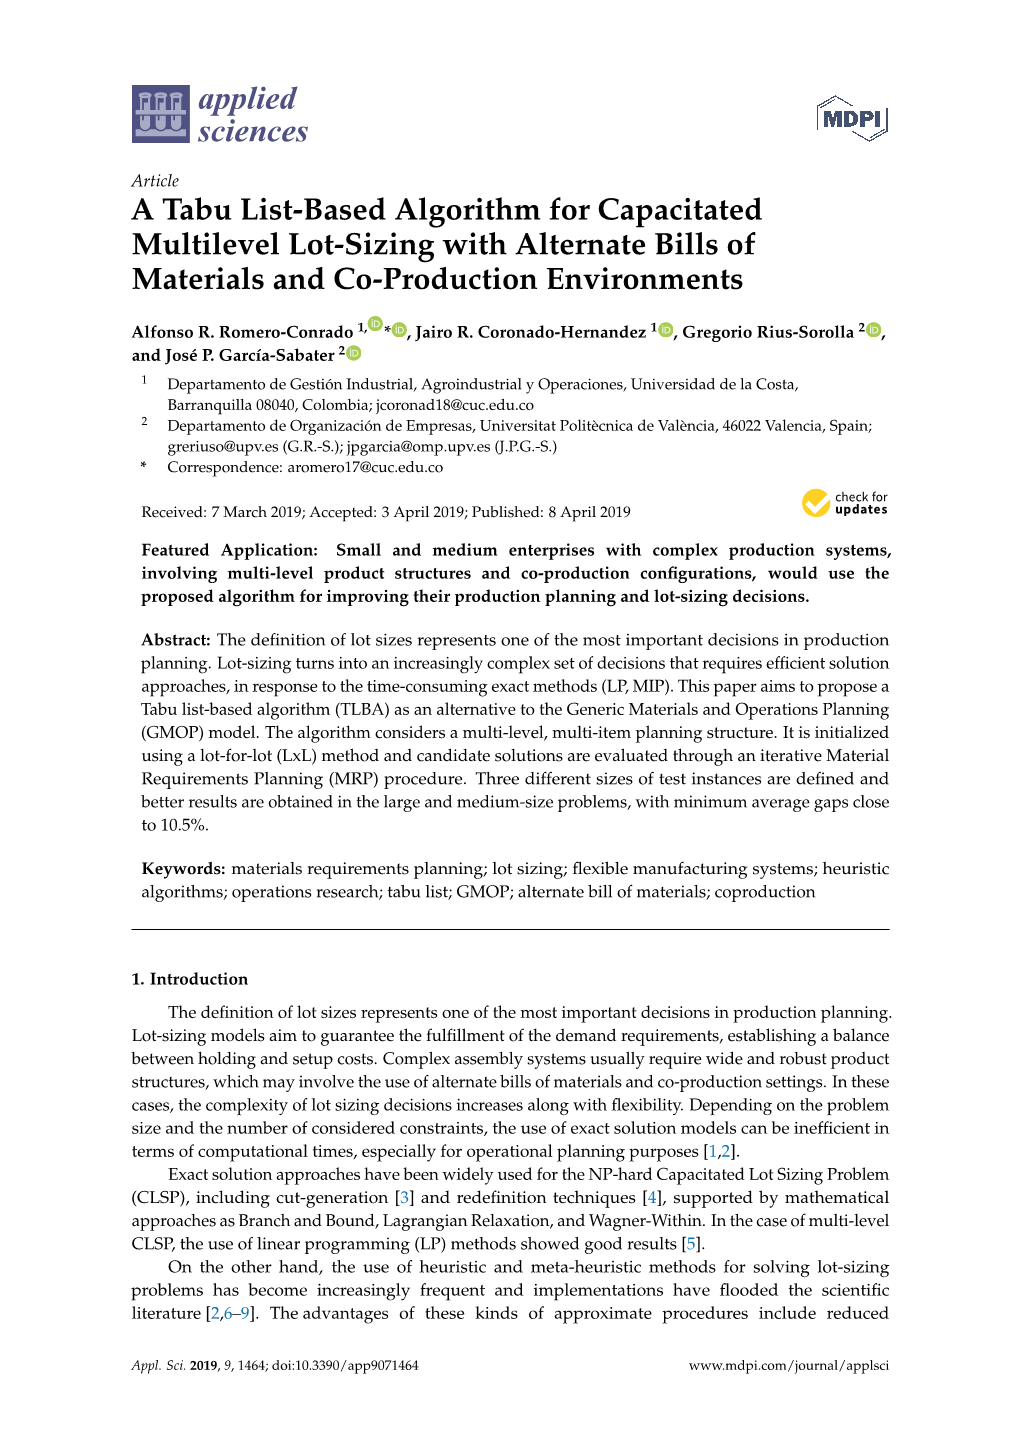 A Tabu List-Based Algorithm for Capacitated Multilevel Lot-Sizing with Alternate Bills of Materials and Co-Production Environments